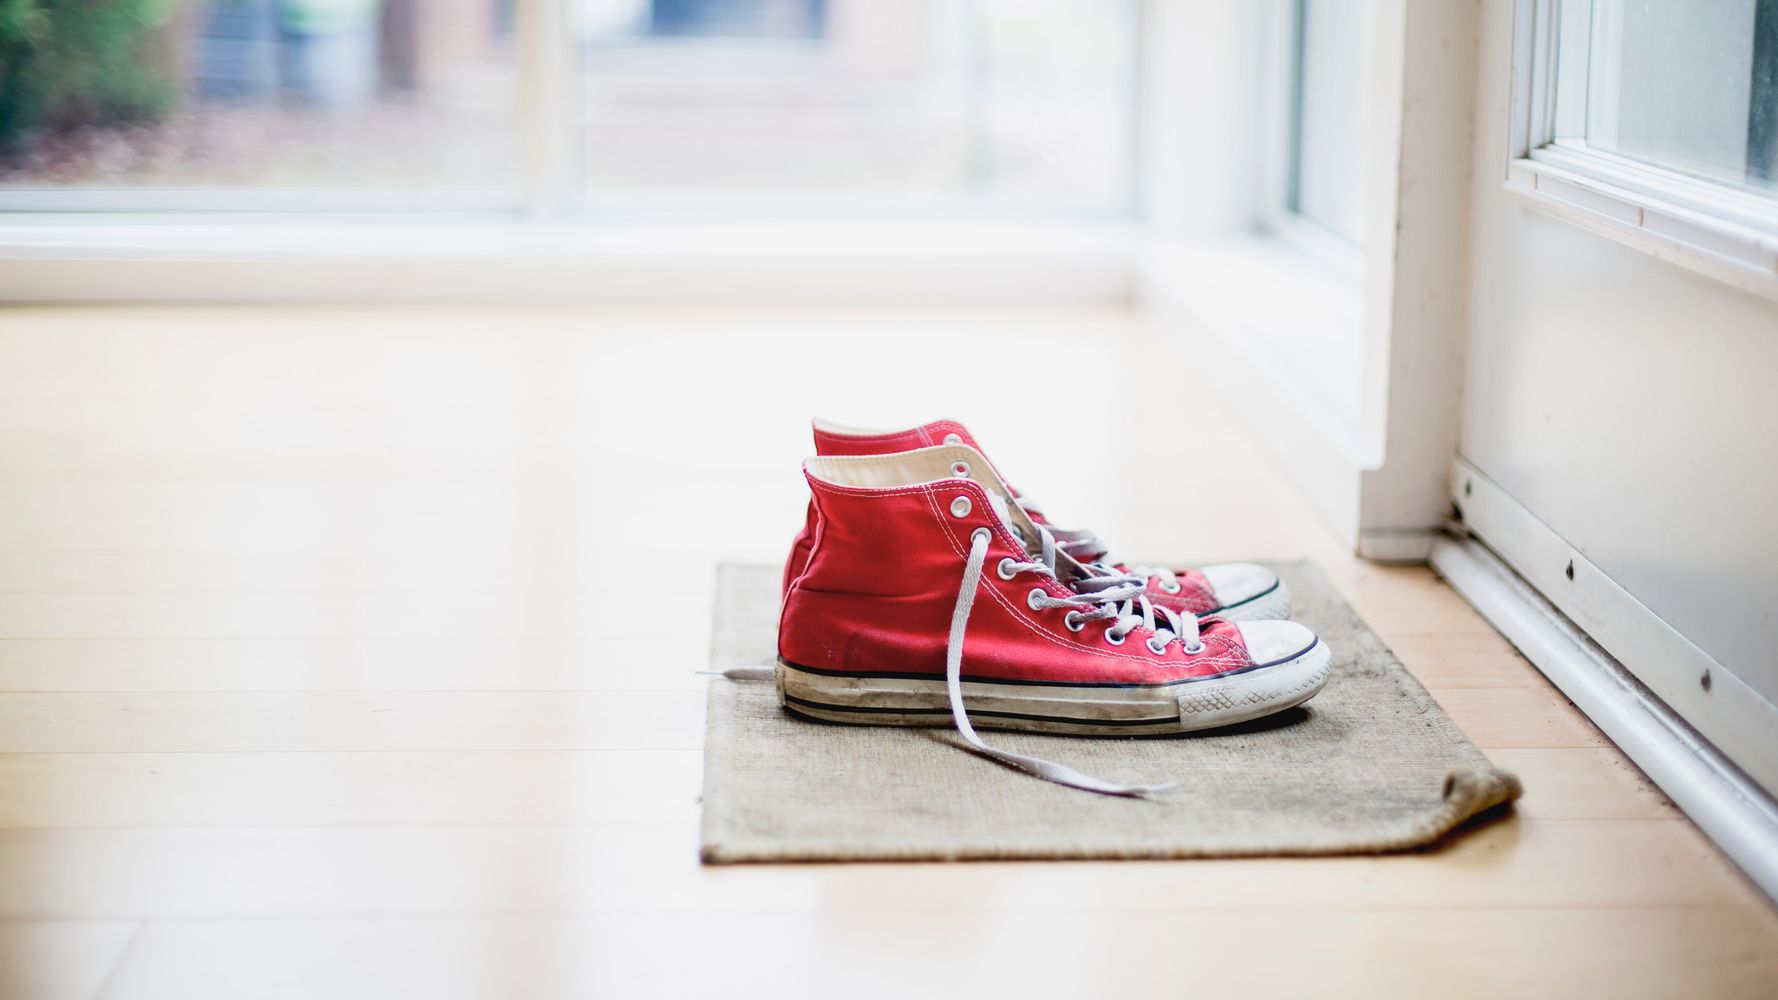 Can Coronavirus Live On Shoes And Be Brought Into Our Homes? | HuffPost ...